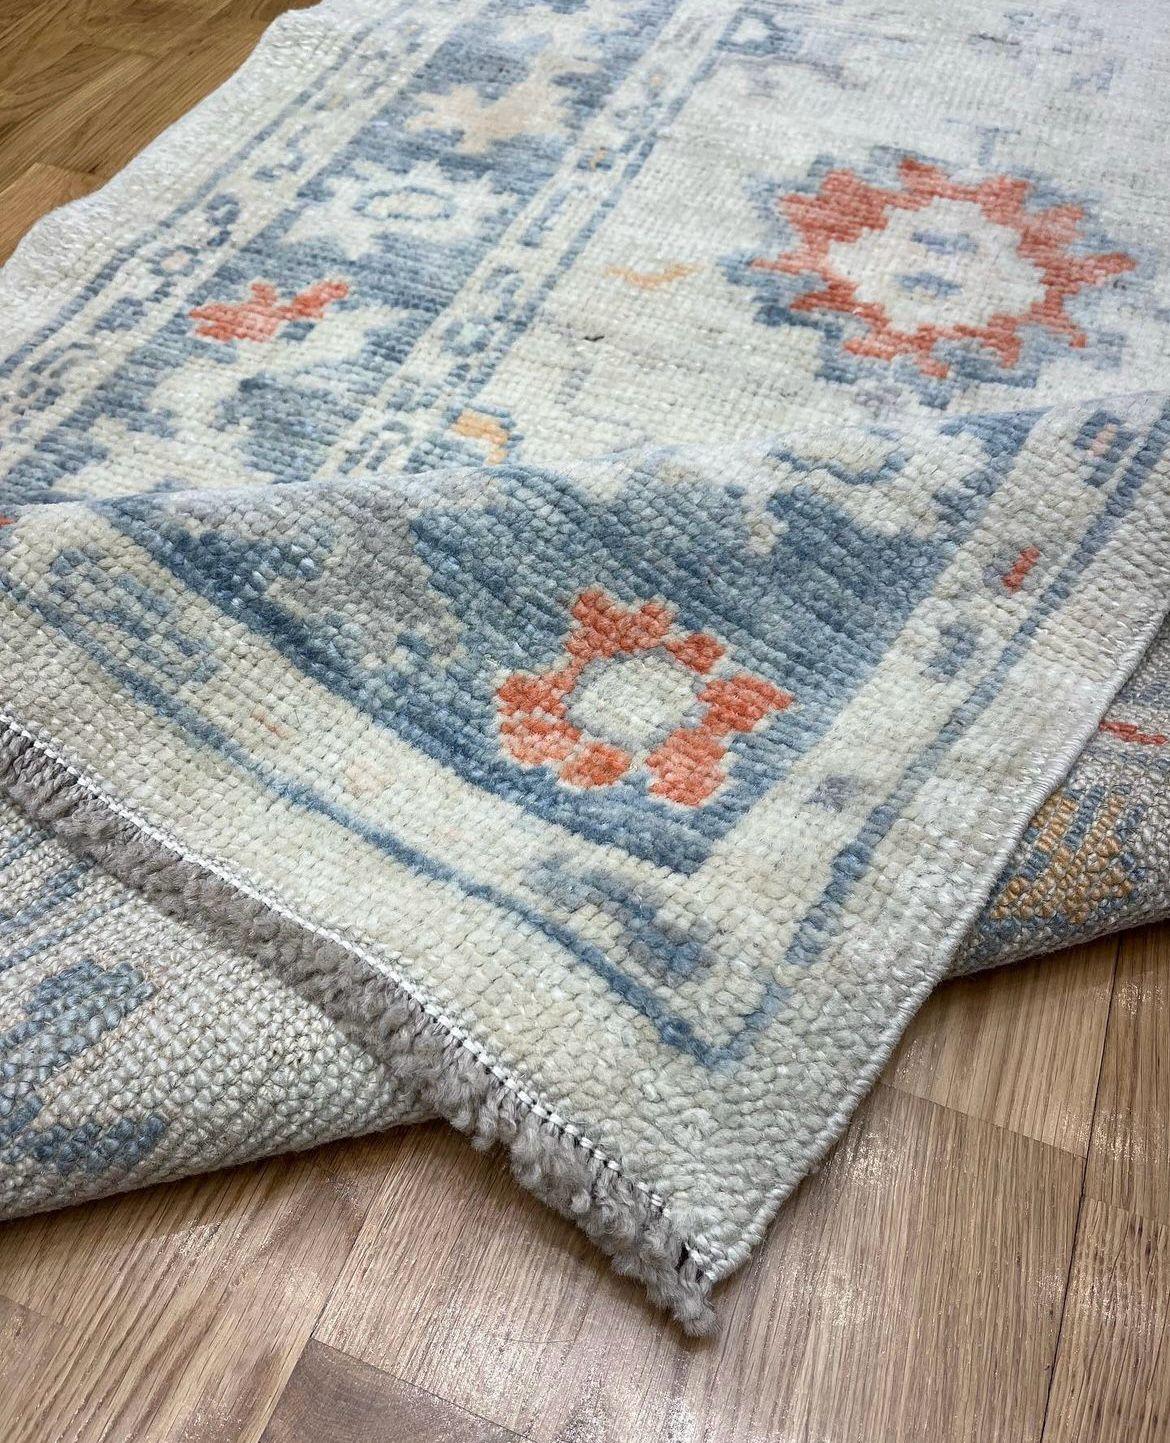 Contemporary Handwoven Wool Turkish Oushak Runner 2’9” x 9’5” #CB02 For Sale